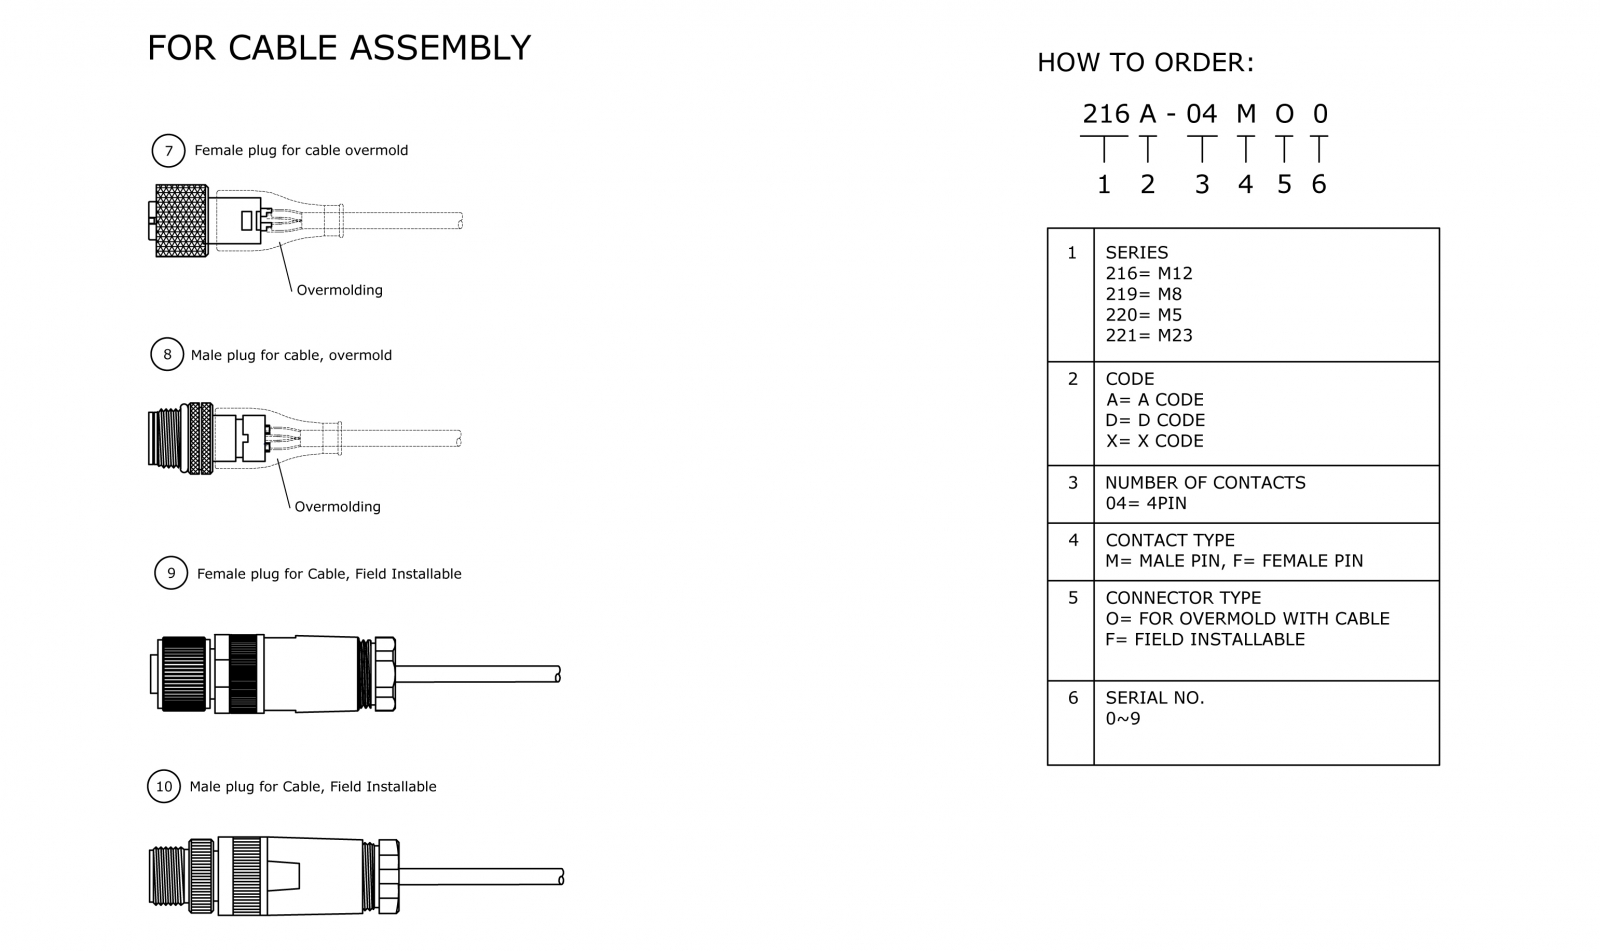 Cable Assembly Ordering Instructions